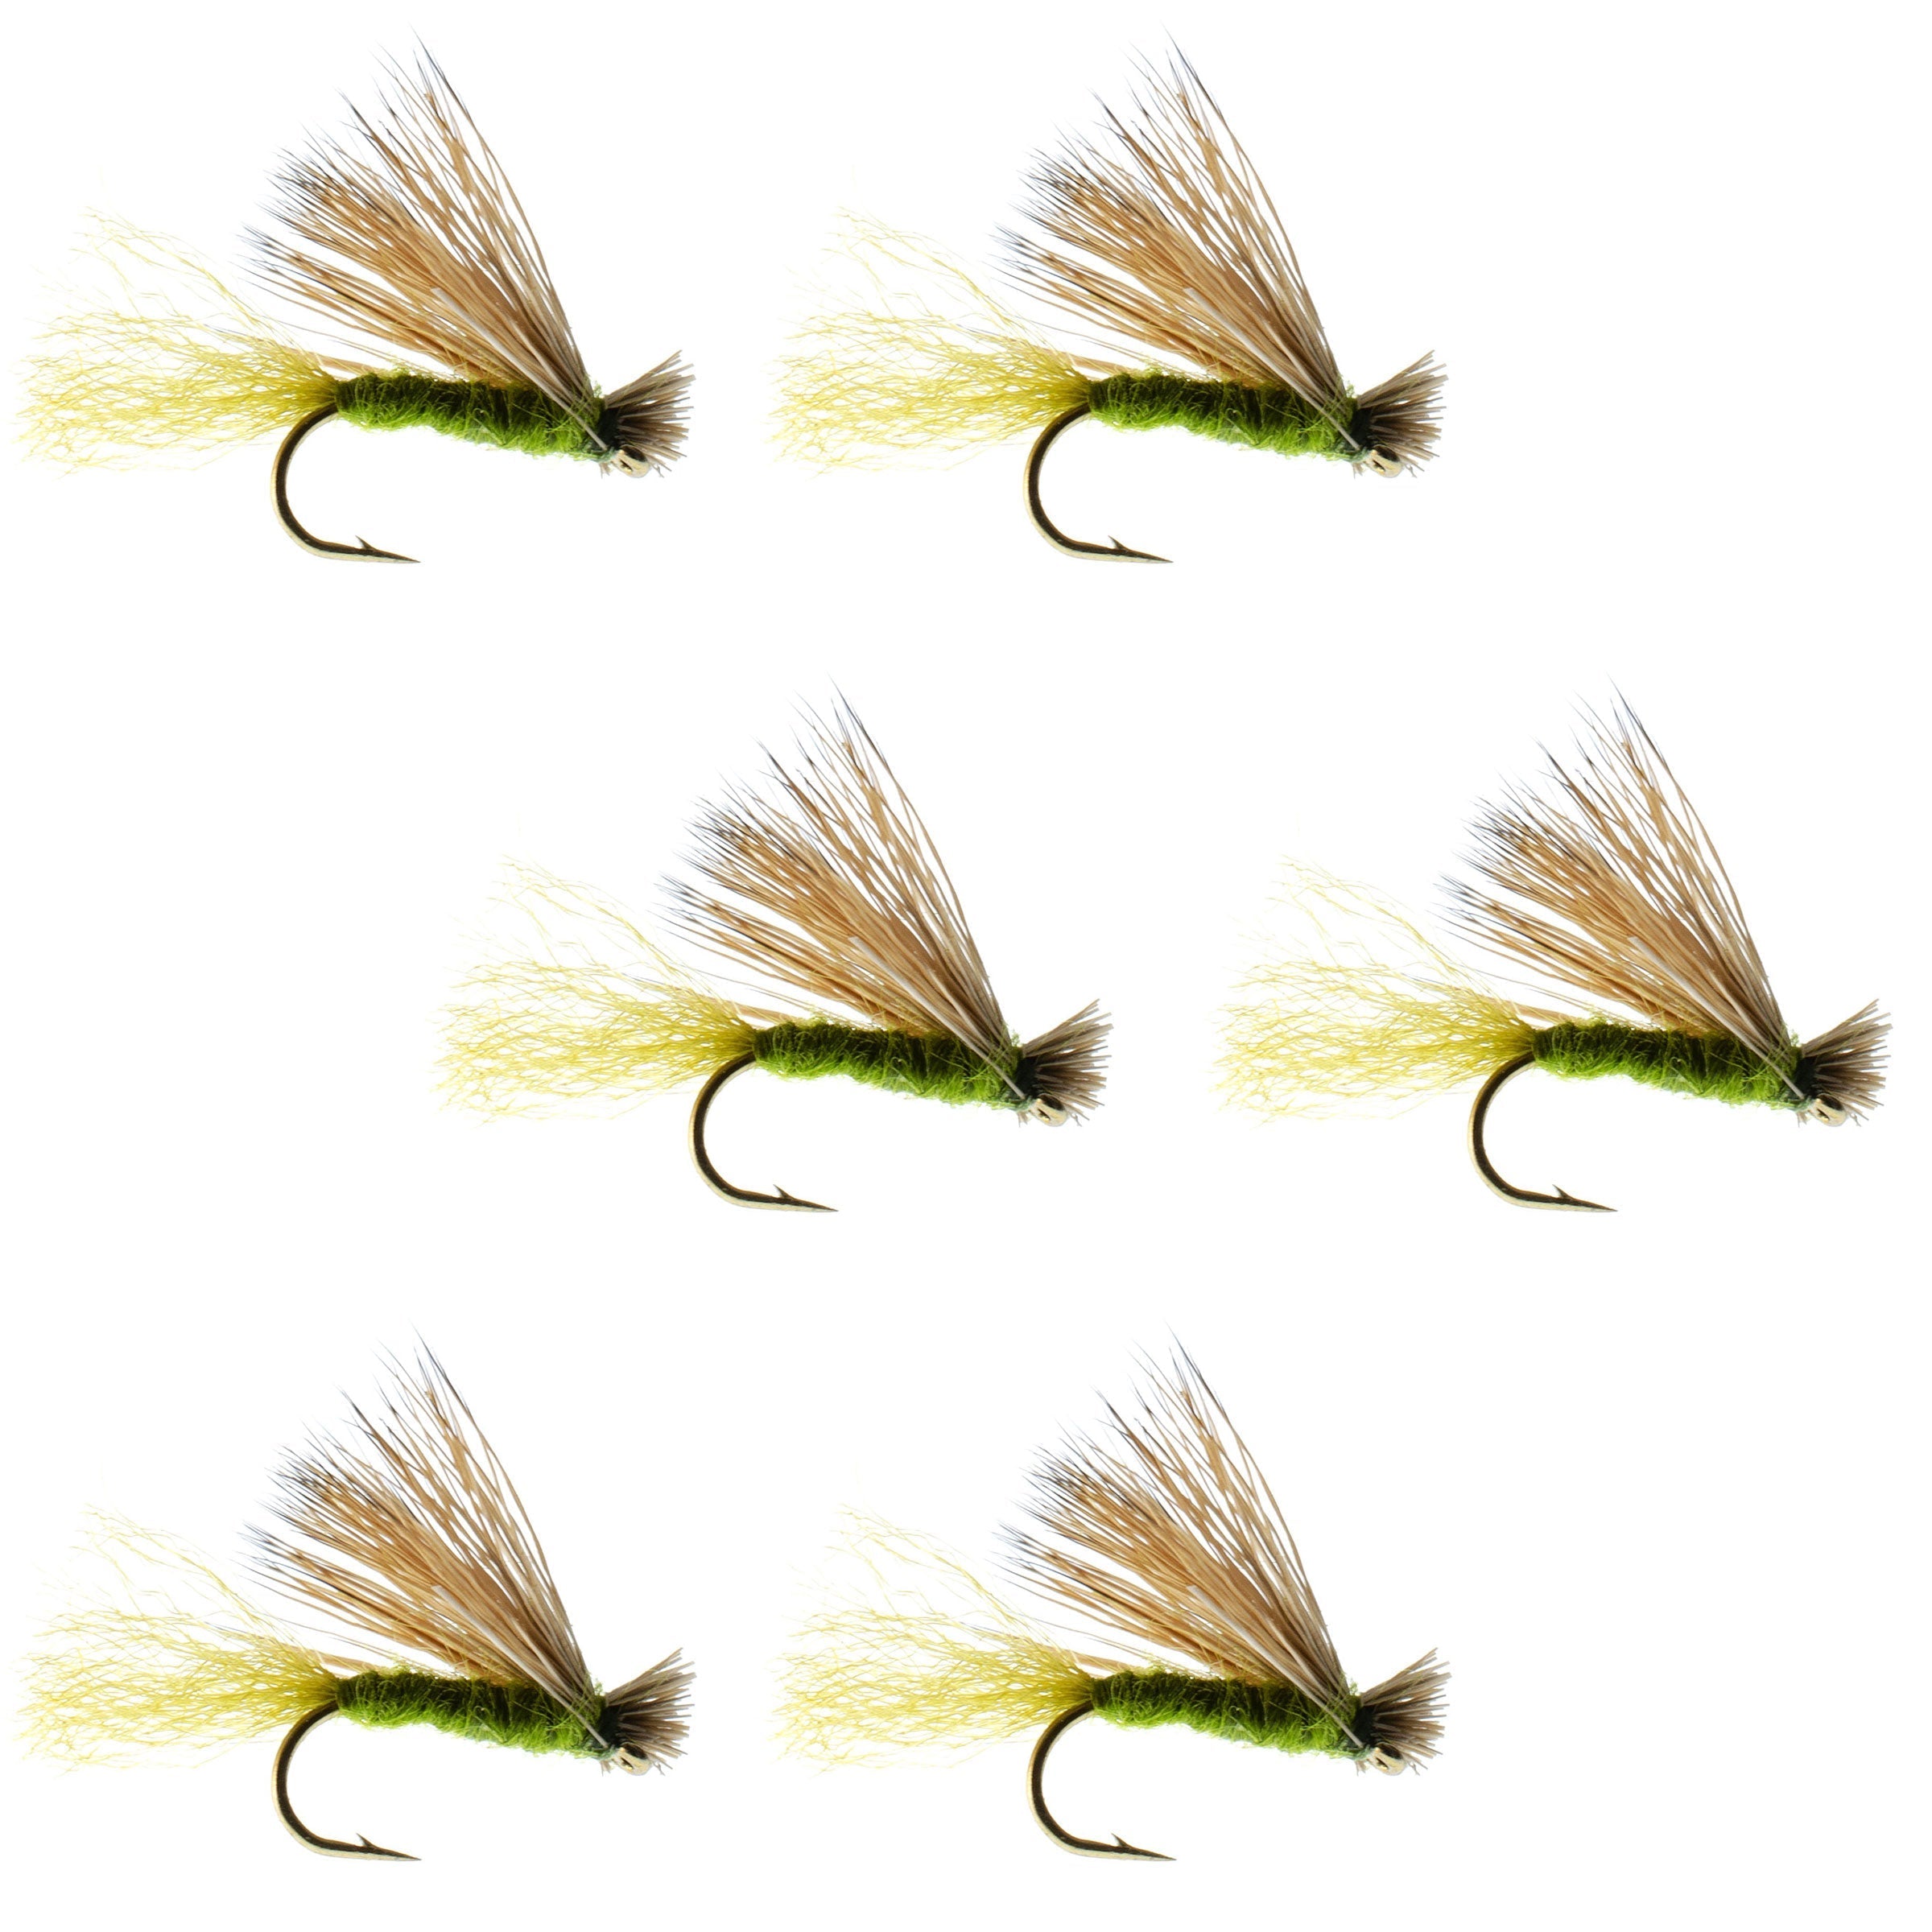 Olive X Caddis Emerging Caddis Adult Trout Dry Fly - 6 Flies Hook Size 14